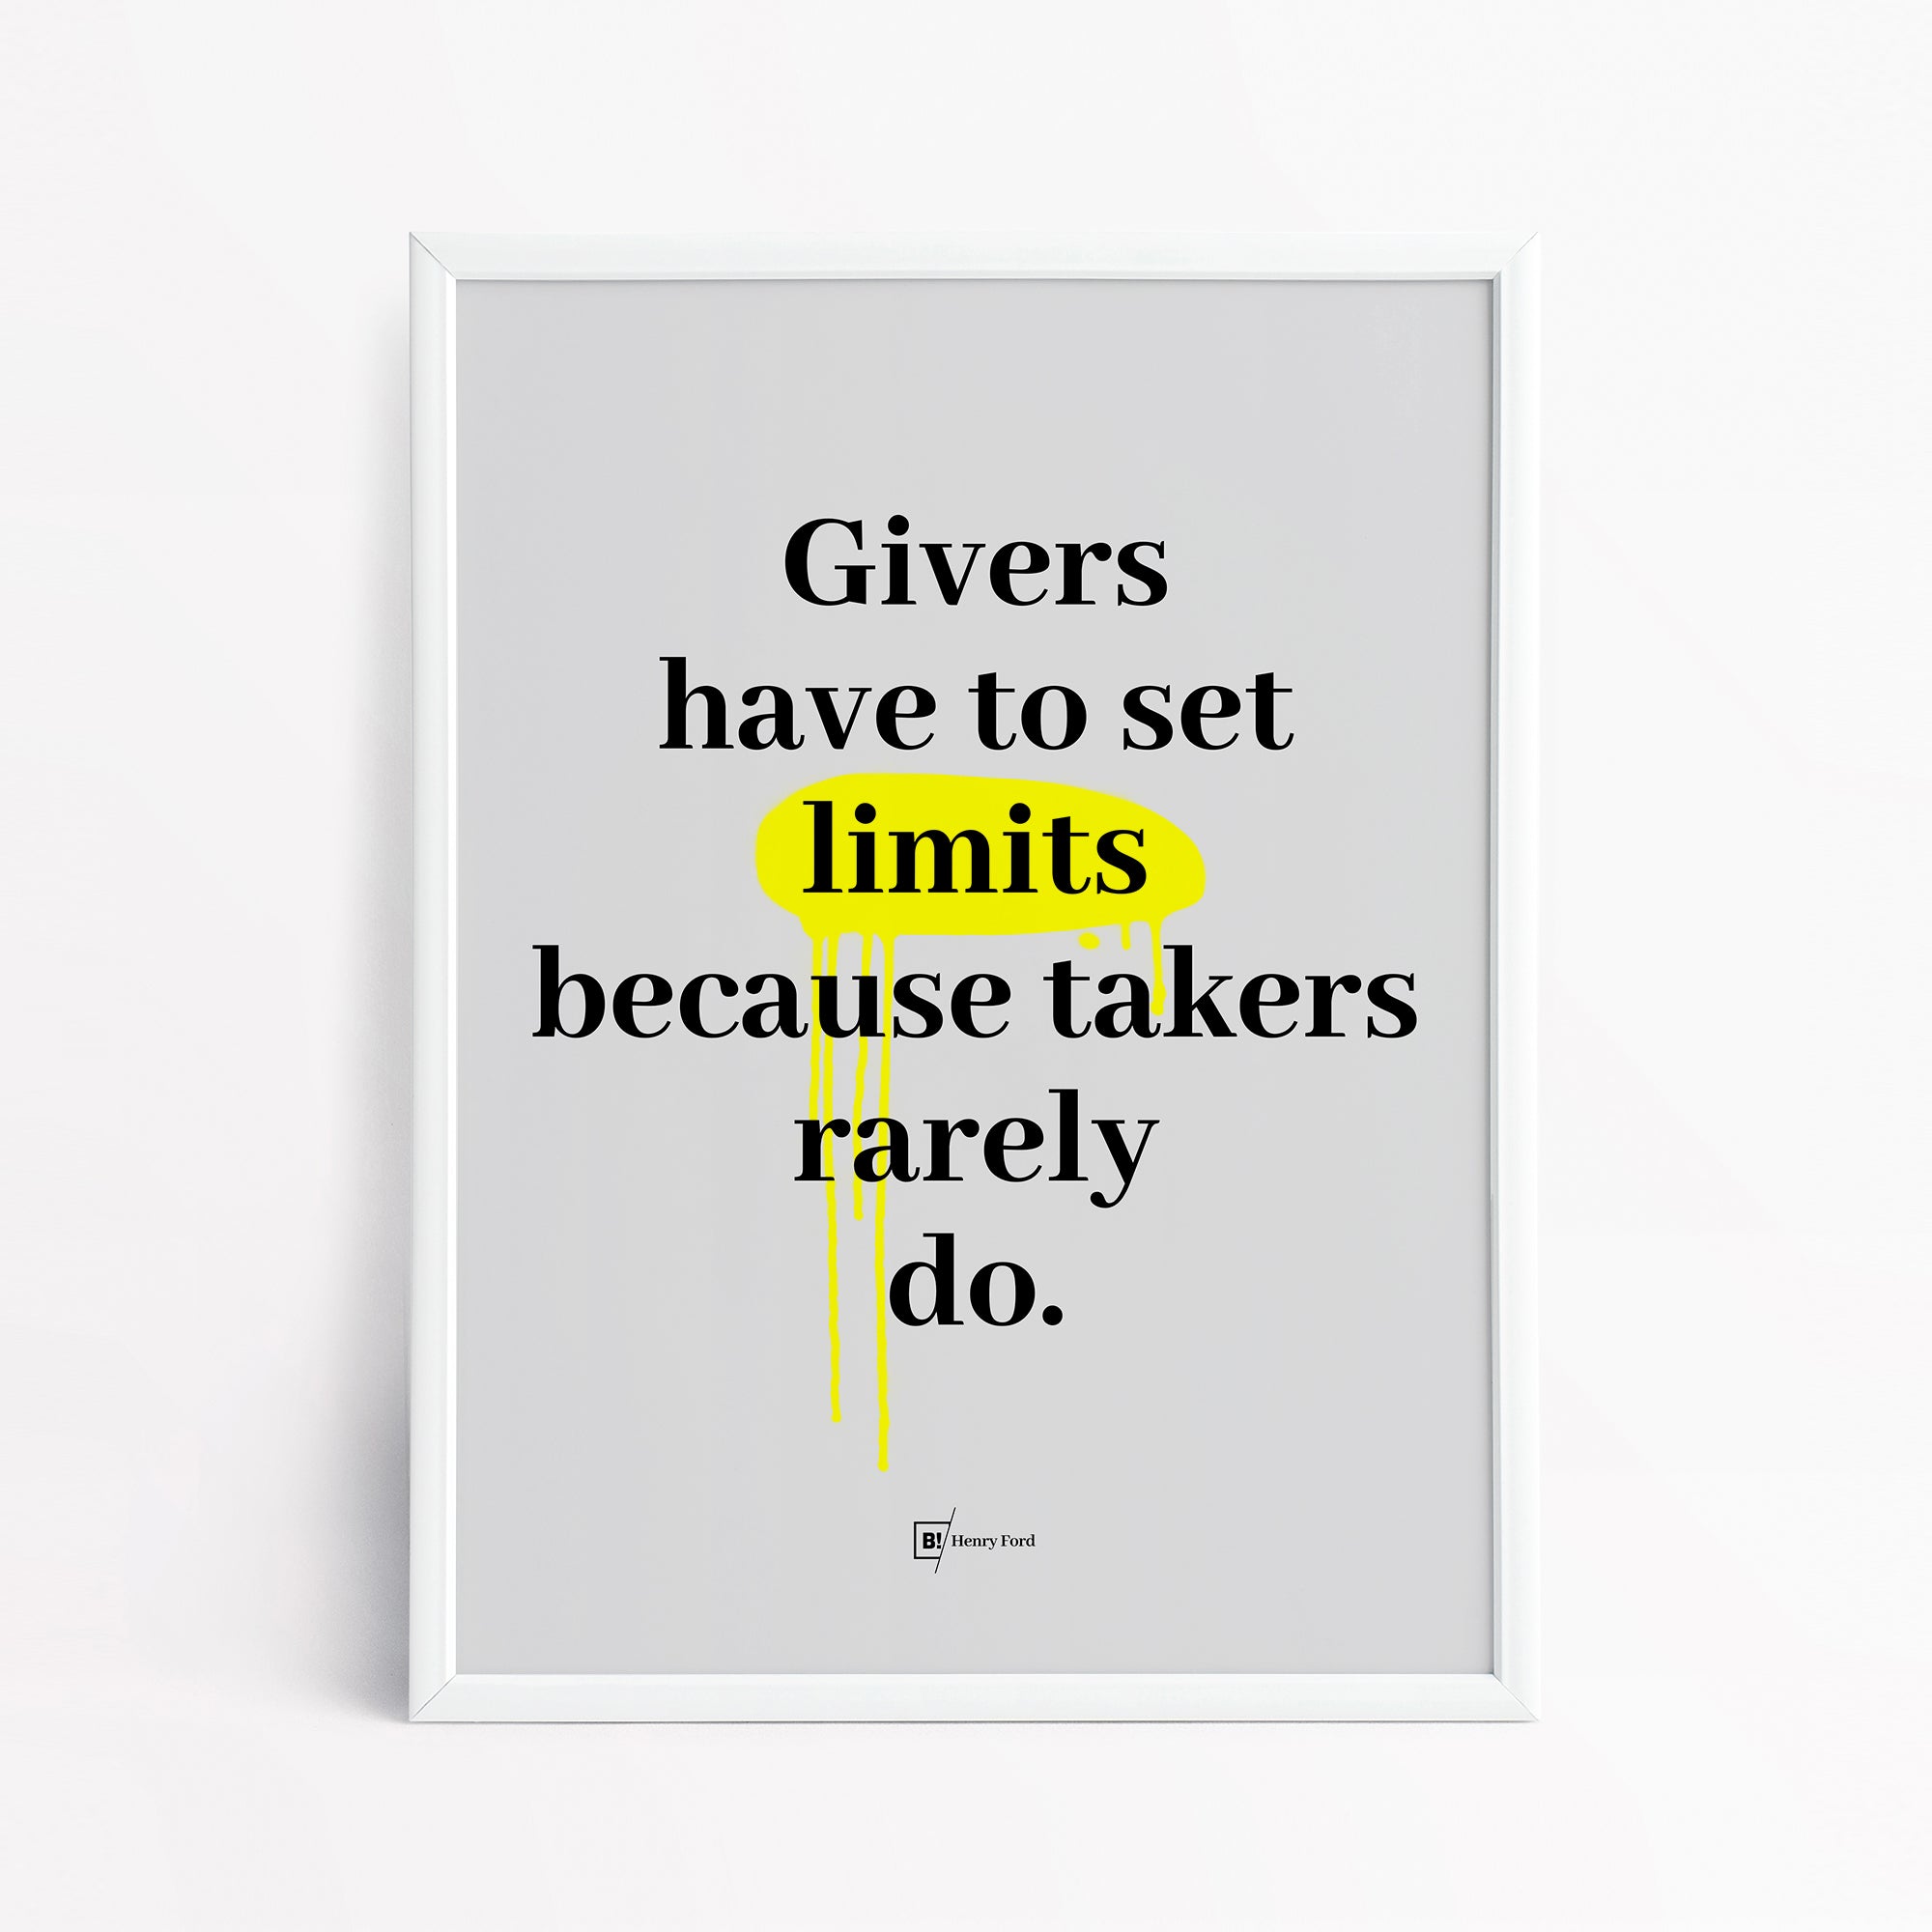 Be inspired by Henry Ford's famous "Givers have to set limits because takers rarely do" quote art print.This artwork was printed using the giclée process on archival acid-free paper and is presented in a simple white frame that captures its timeless beauty in every detail.